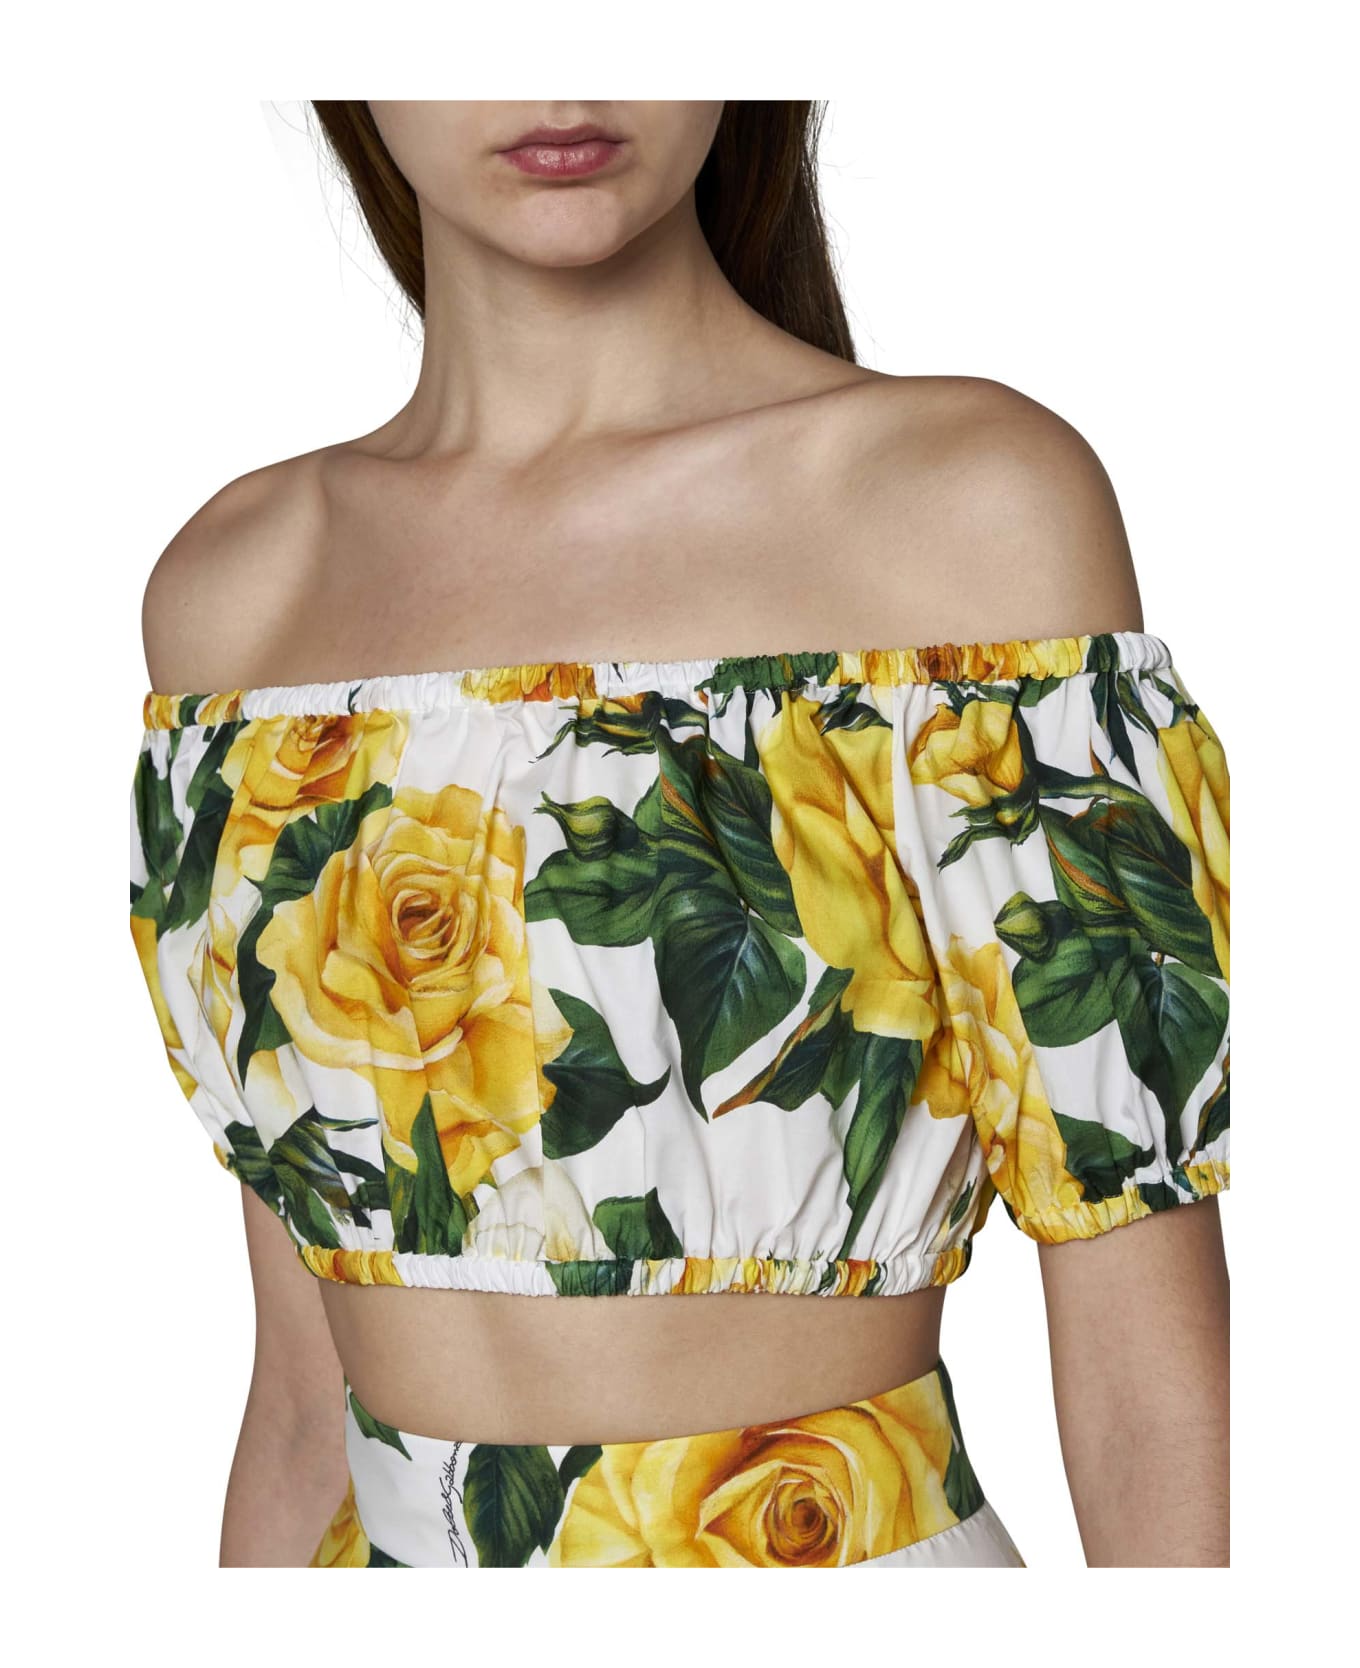 Dolce & Gabbana Crop Top With Floral Print - Rose gialle fdo bco トップス